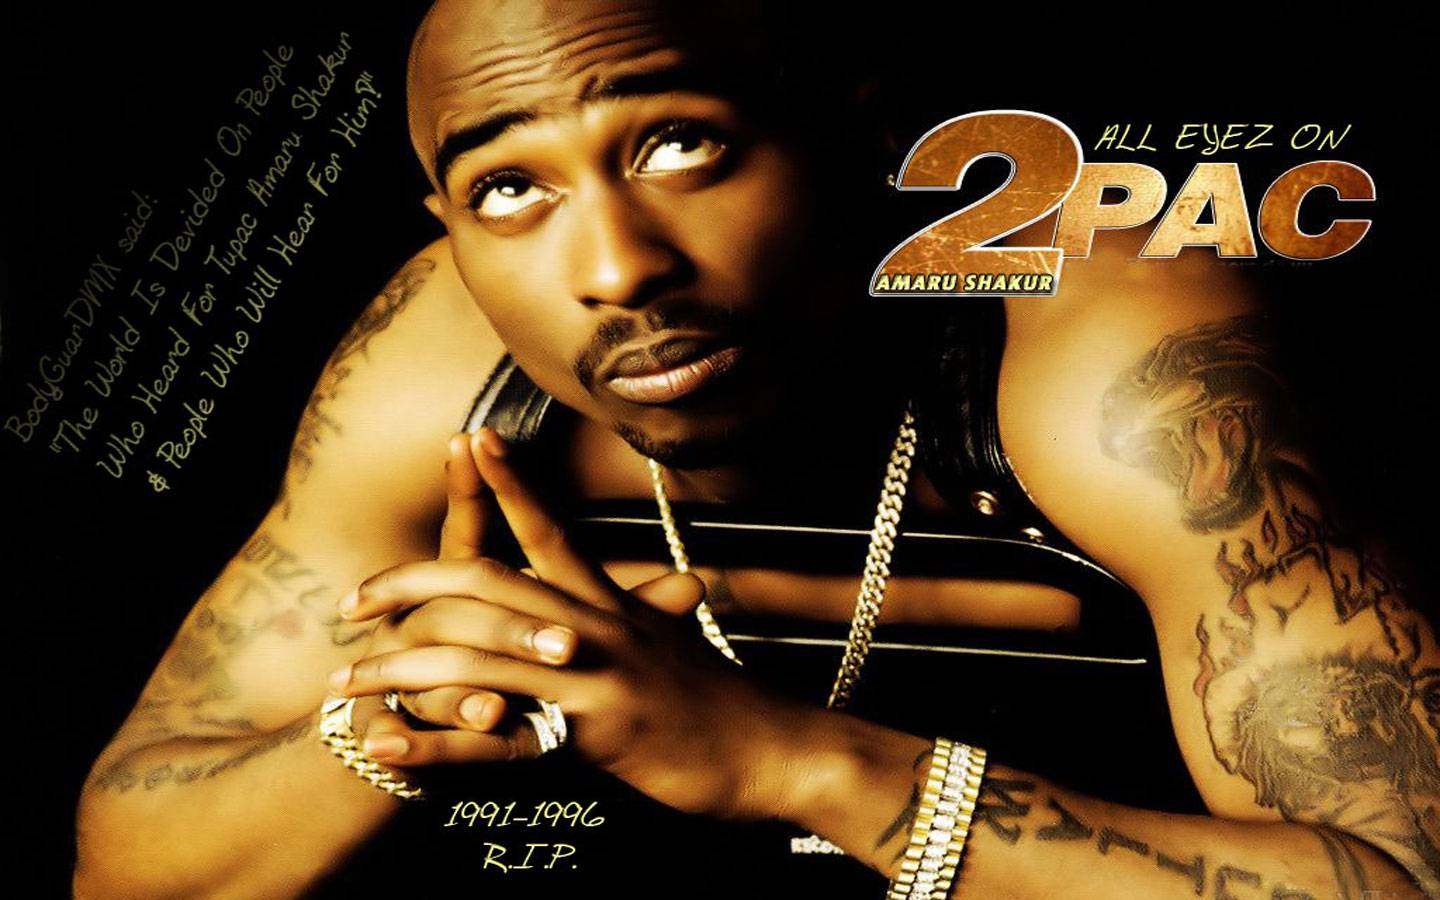 2pac all eyez on me full album mp3 download free